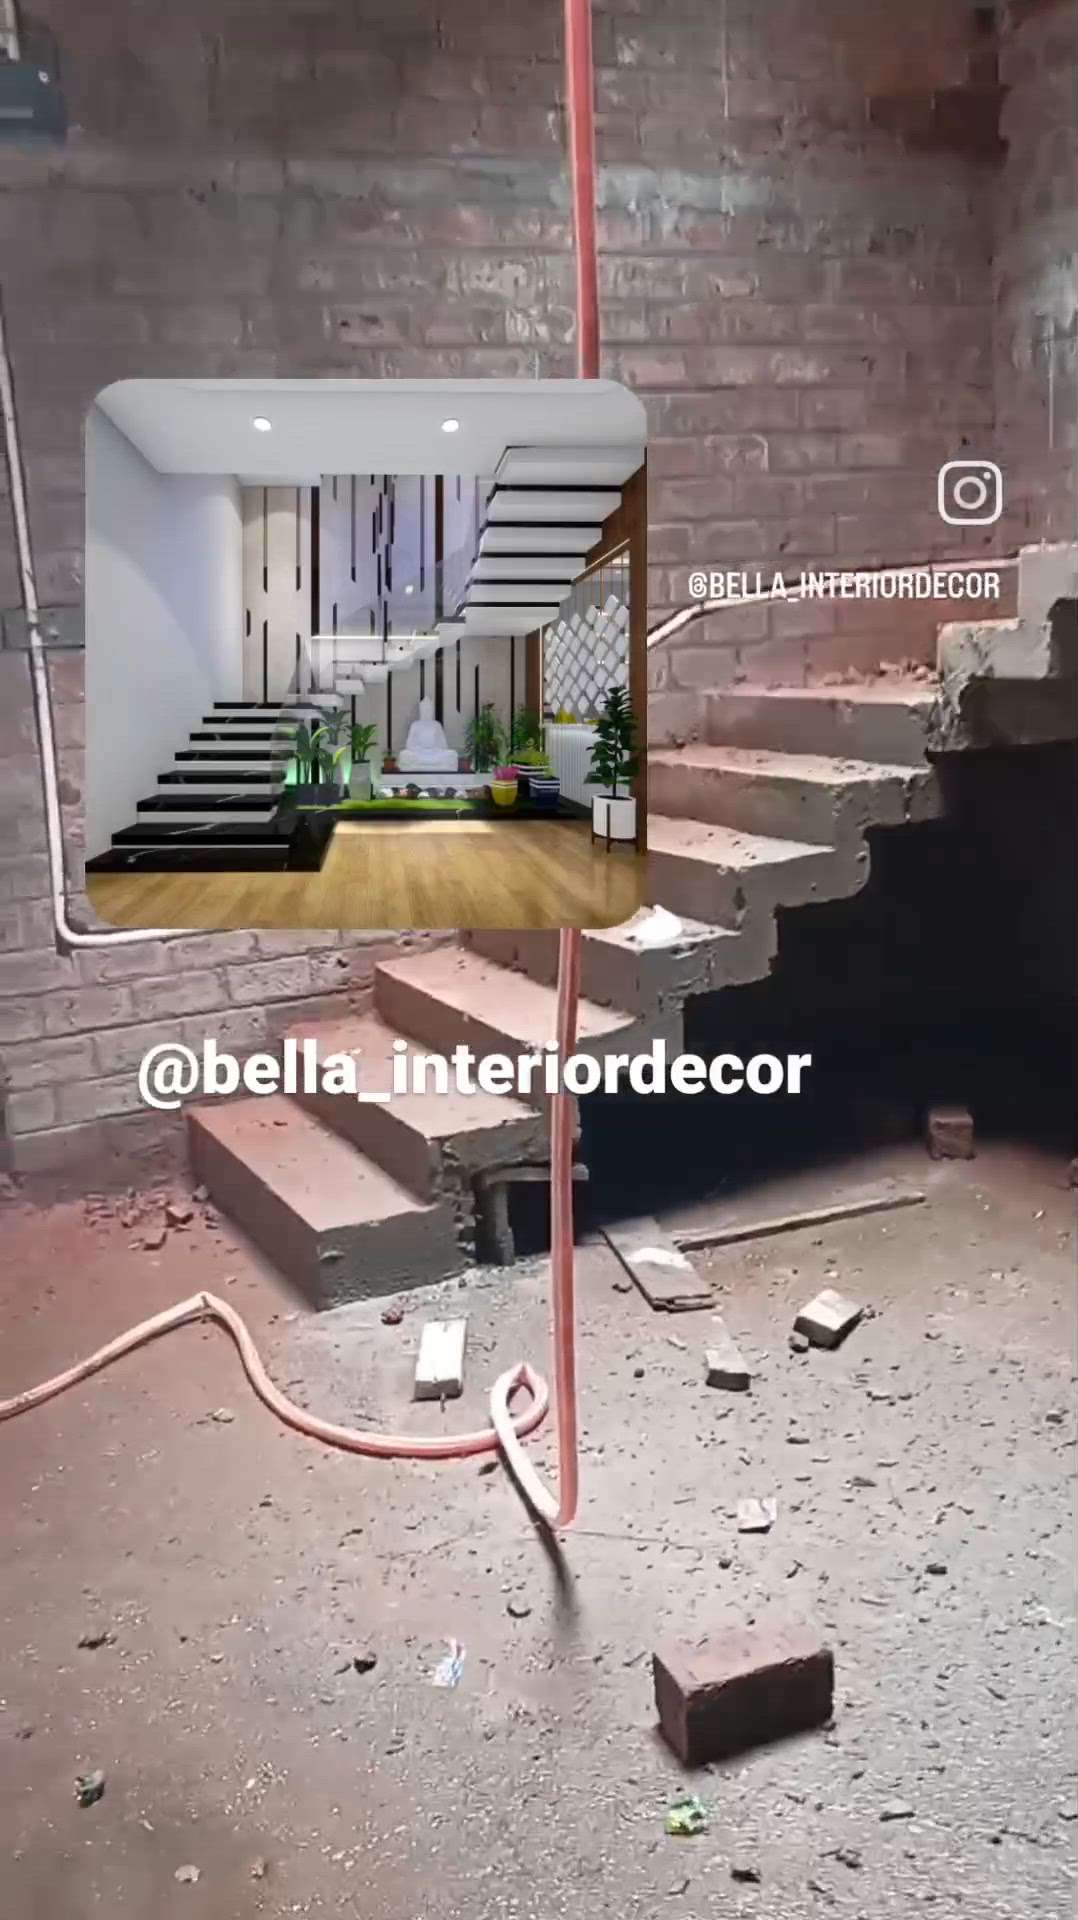 house construction new project 



For house interiors contact

BELLA INTERIOR DECOR 
.
.
Make Your Dream House Come True With @bella_interiordecor 
.
.
• Your Budget ~ Their Brain 
• Themed Based Work
• BedRooms, Living Rooms, Study, Kitchen, Offices, Showrooms & More! 
.
.

.
Address :- jangirwala square Indore m.p. 

Credits: bella_interiordecor 

#interiordesign #design #interior #homedecor
#architecture #home #decor #interiors
#homedesign #interiordesigner #furniture
 #designer #interiorstyling
#interiordecor #homesweethome 
#furnituredesign #livingroom #interiordecorating  #instagood #instagram
#kitchendesign #foryou #photographylover #explorepage✨ #explorepage #viralpost #trending #trends #reelsinstagram #exploremore   #kolopost   #koloapp  #koloviral  #koloindore  #InteriorDesigner  #indorehouse   #LUXURY_INTERIOR   #luxurysofa   #luxurylivingroom  #koloapppurchase